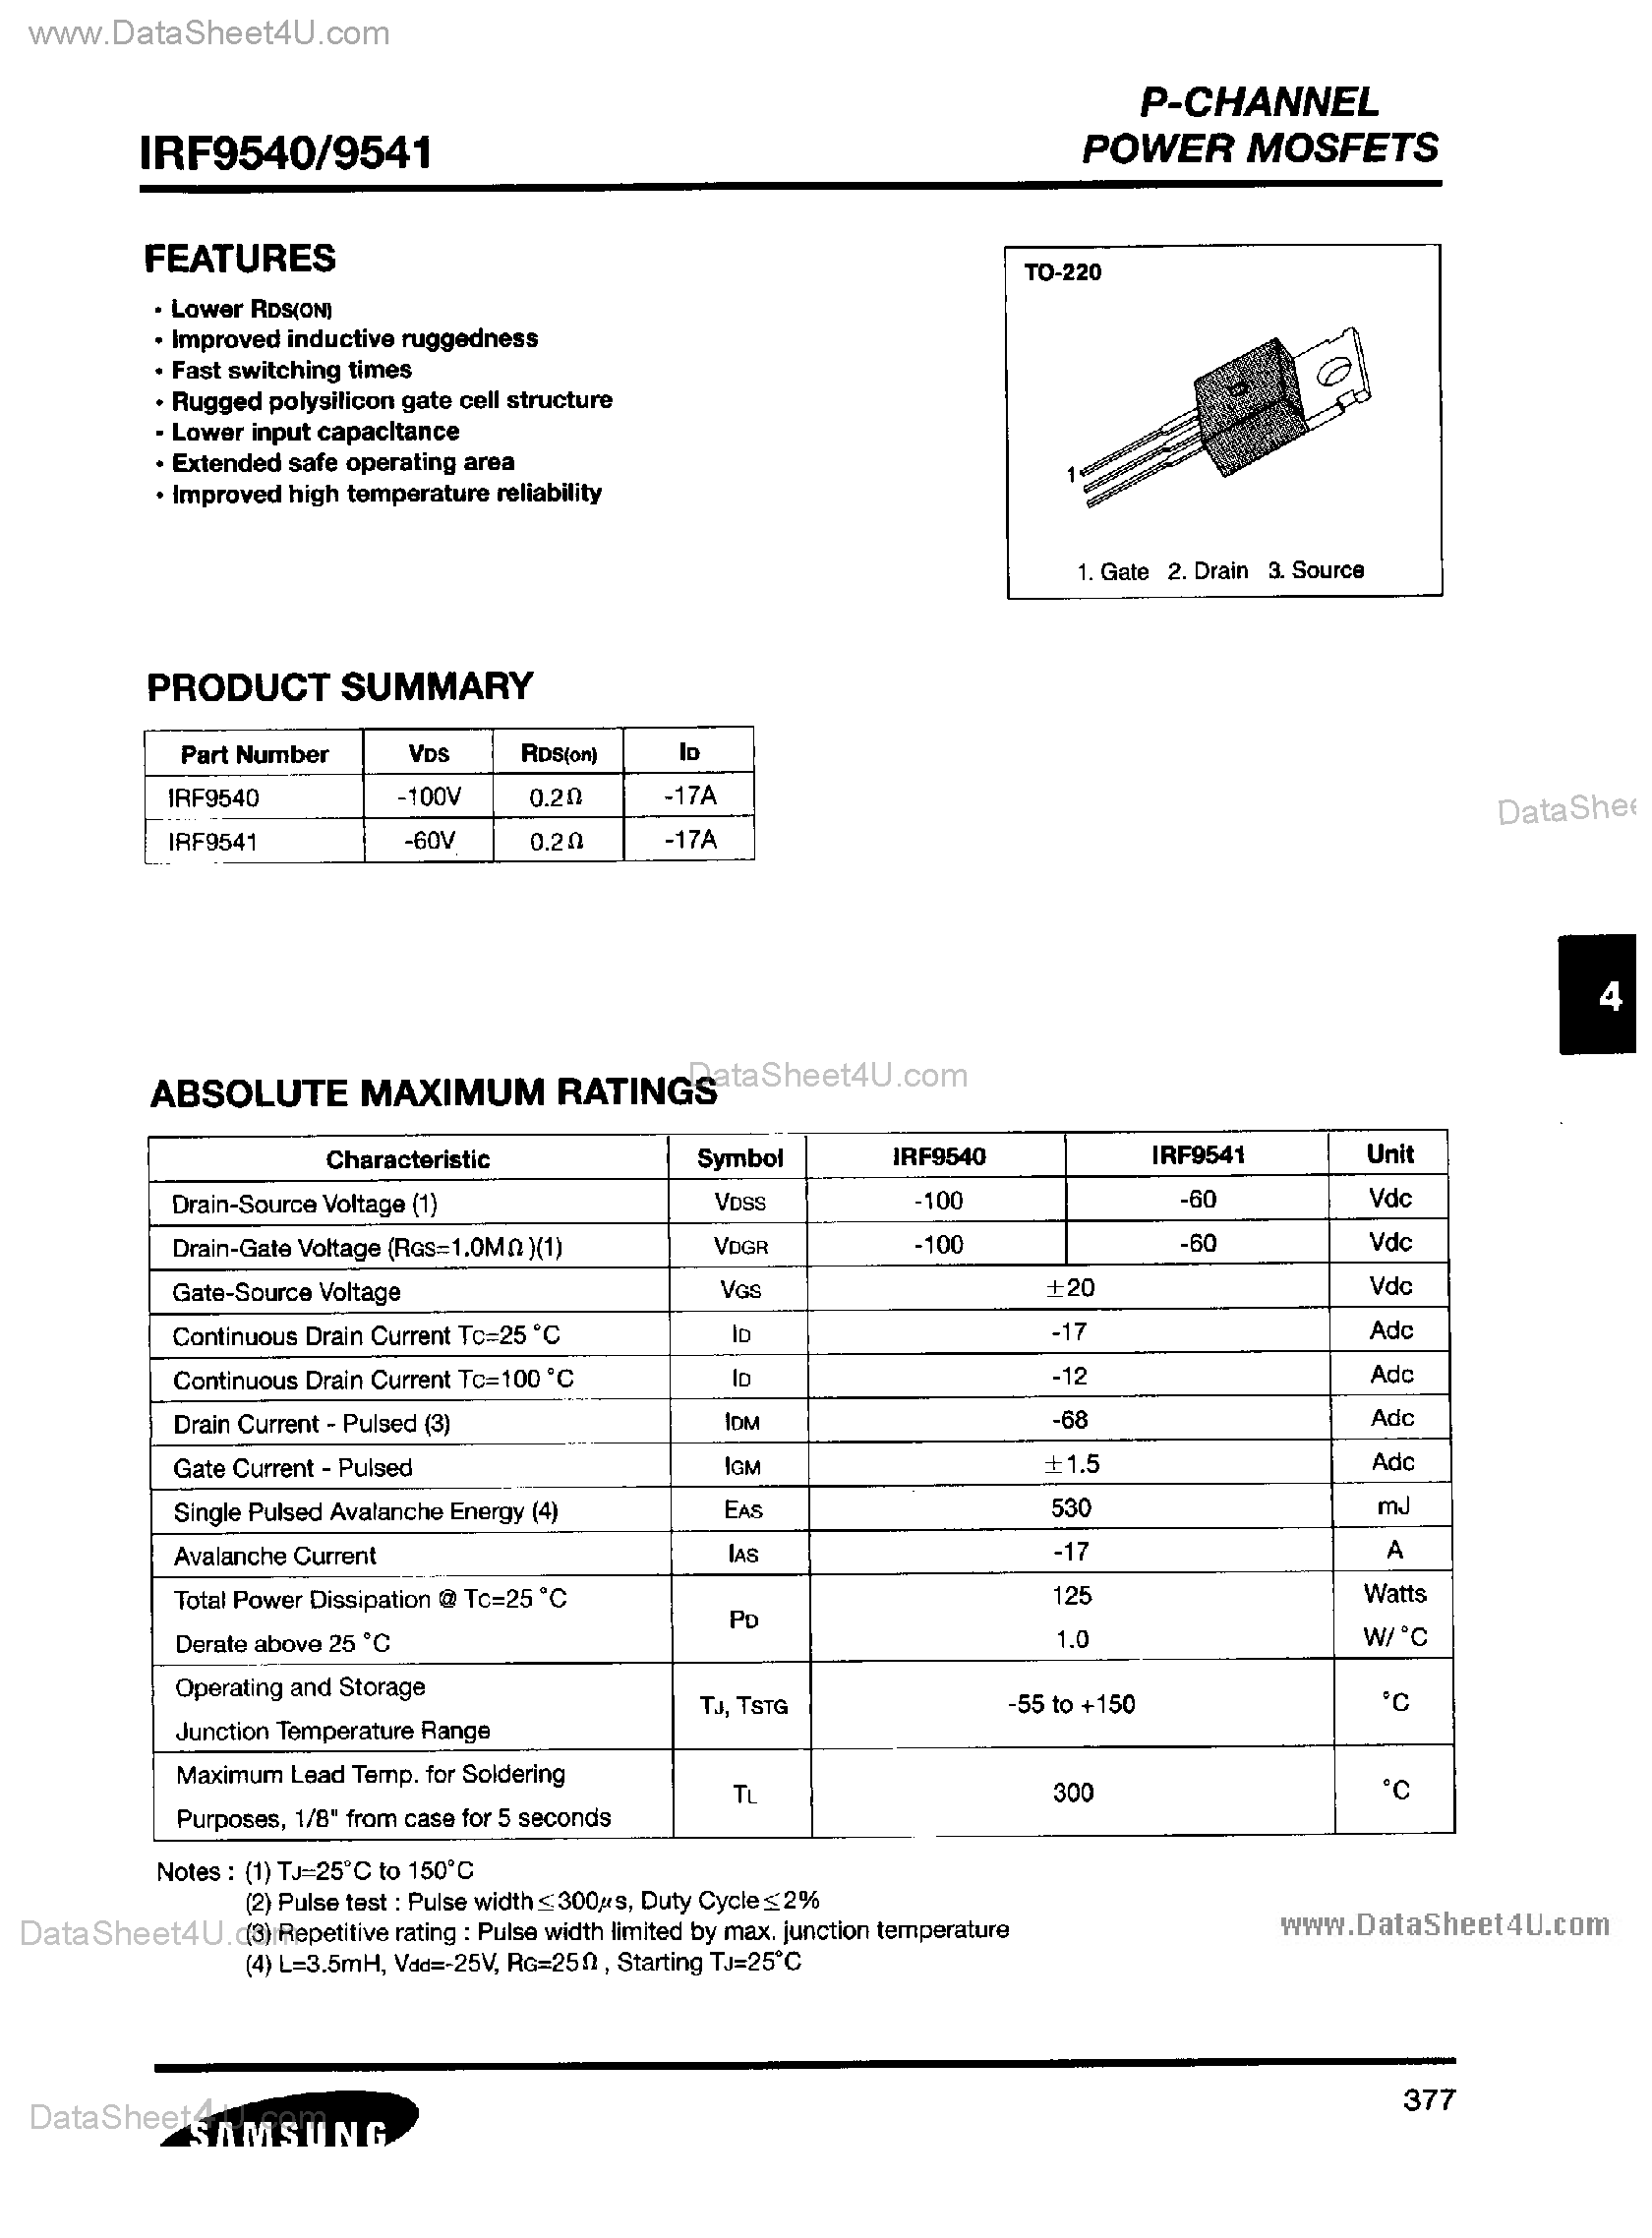 Даташит IRF9540 - (IRF9540 / IRF9541) P-CHANNEL POWER MOSFETS страница 1